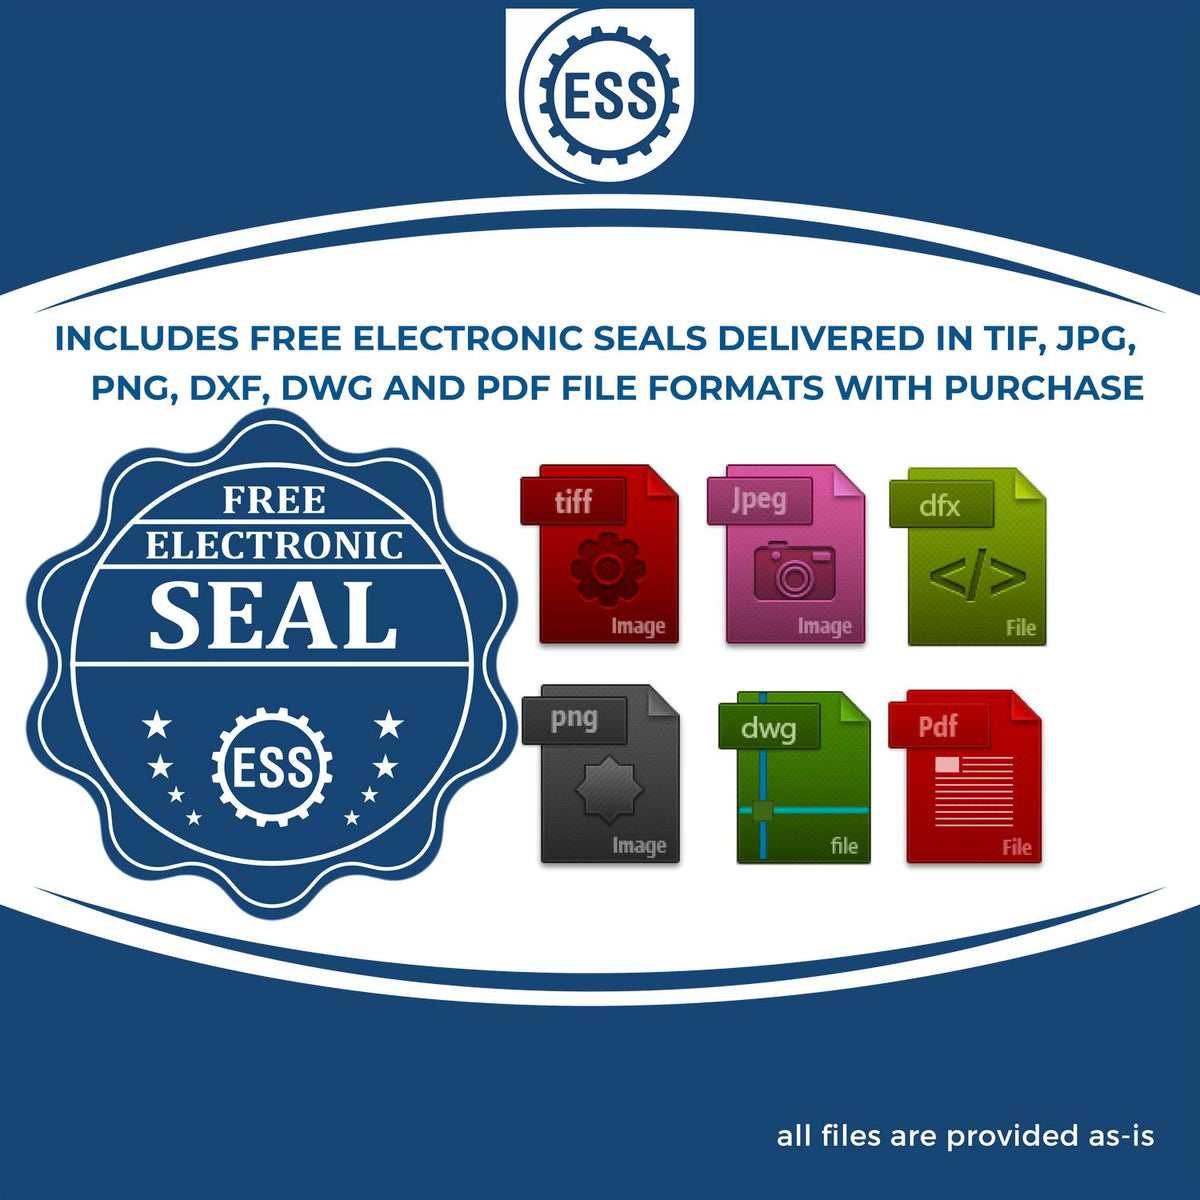 An infographic for the free electronic seal for the Heavy Duty Cast Iron New Jersey Geologist Seal Embosser illustrating the different file type icons such as DXF, DWG, TIF, JPG and PNG.